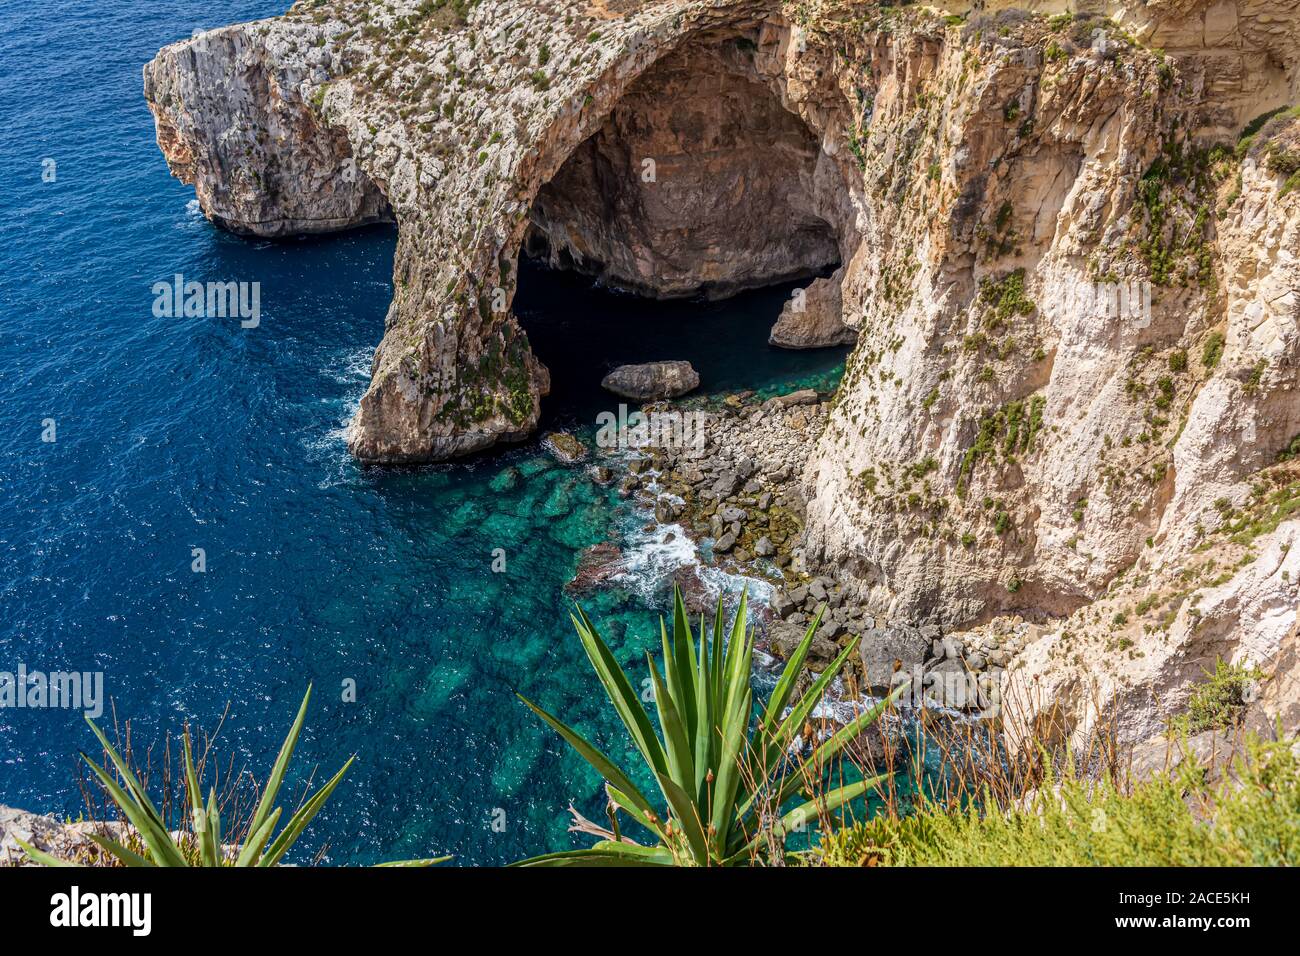 Natural stone arch of Blue Grotto and sea caverns in Malta, with agave plant in foreground. Blue Grotto seascape. Stock Photo